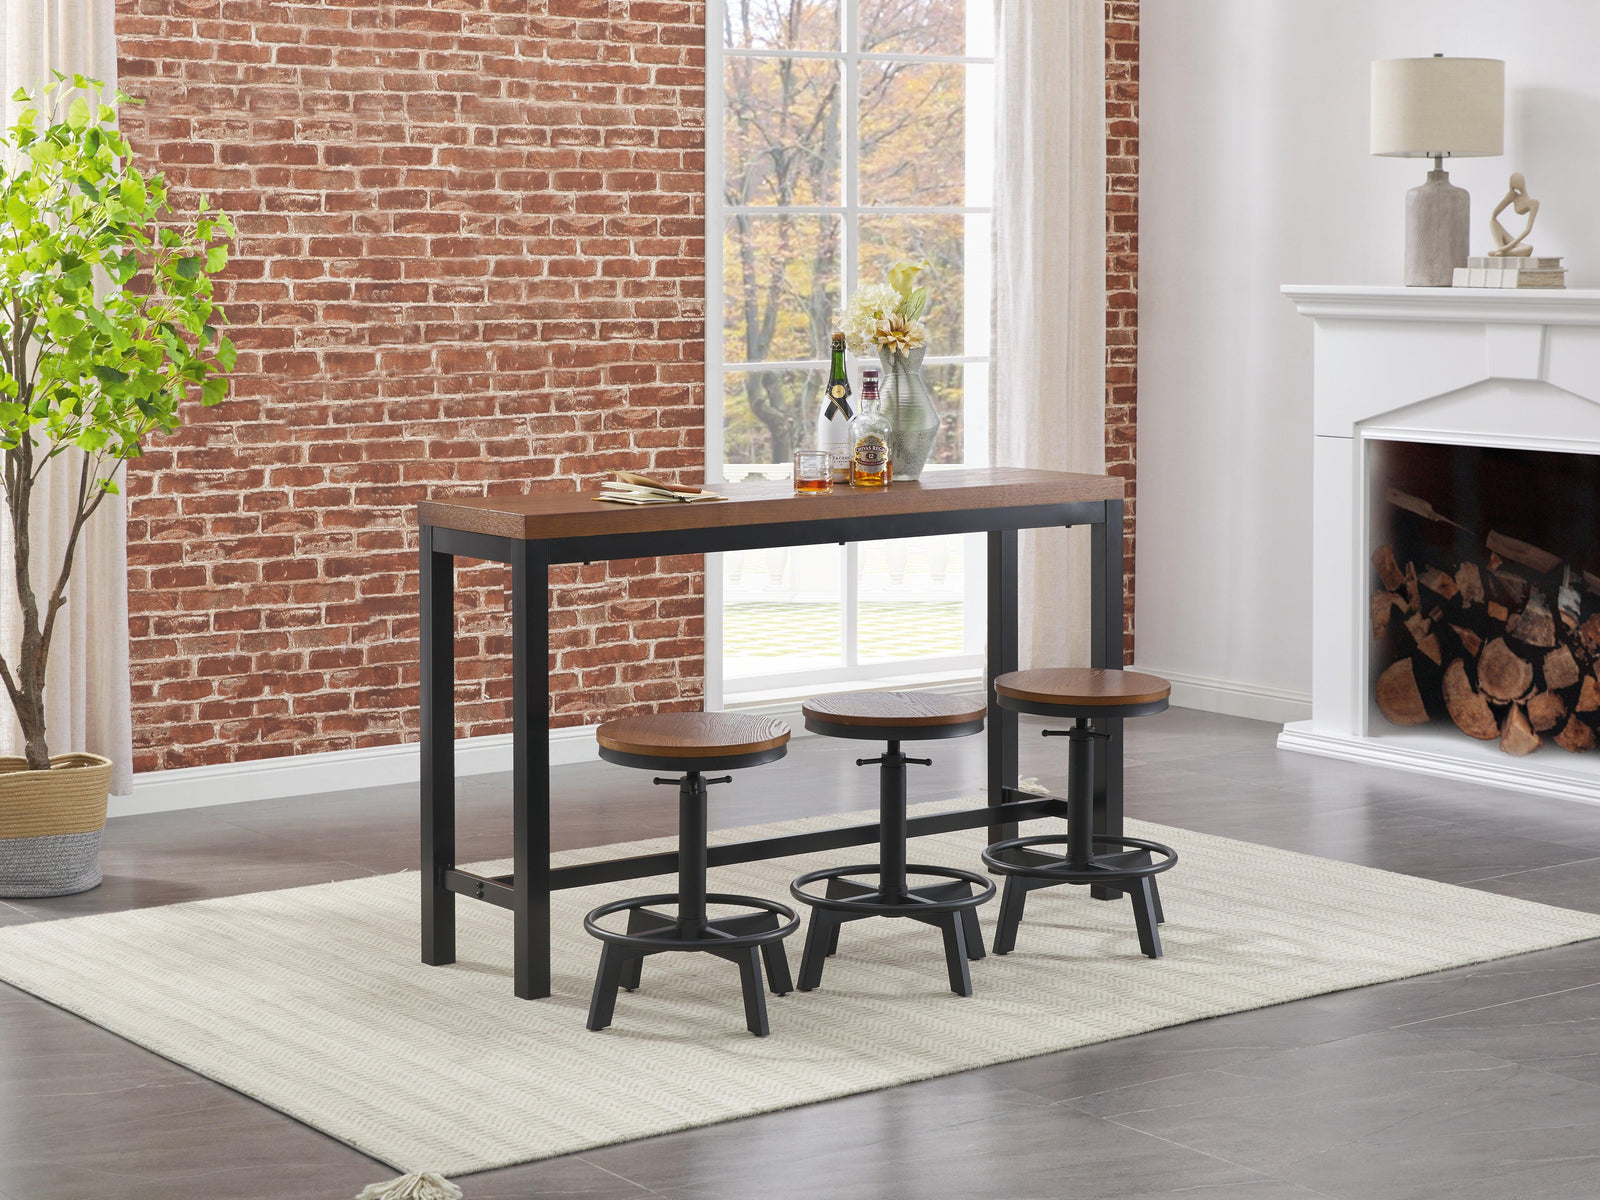 Quinidad Black/brown Counter Height Dining Table And Bar Stools (Set Of 4) - Ella Furniture